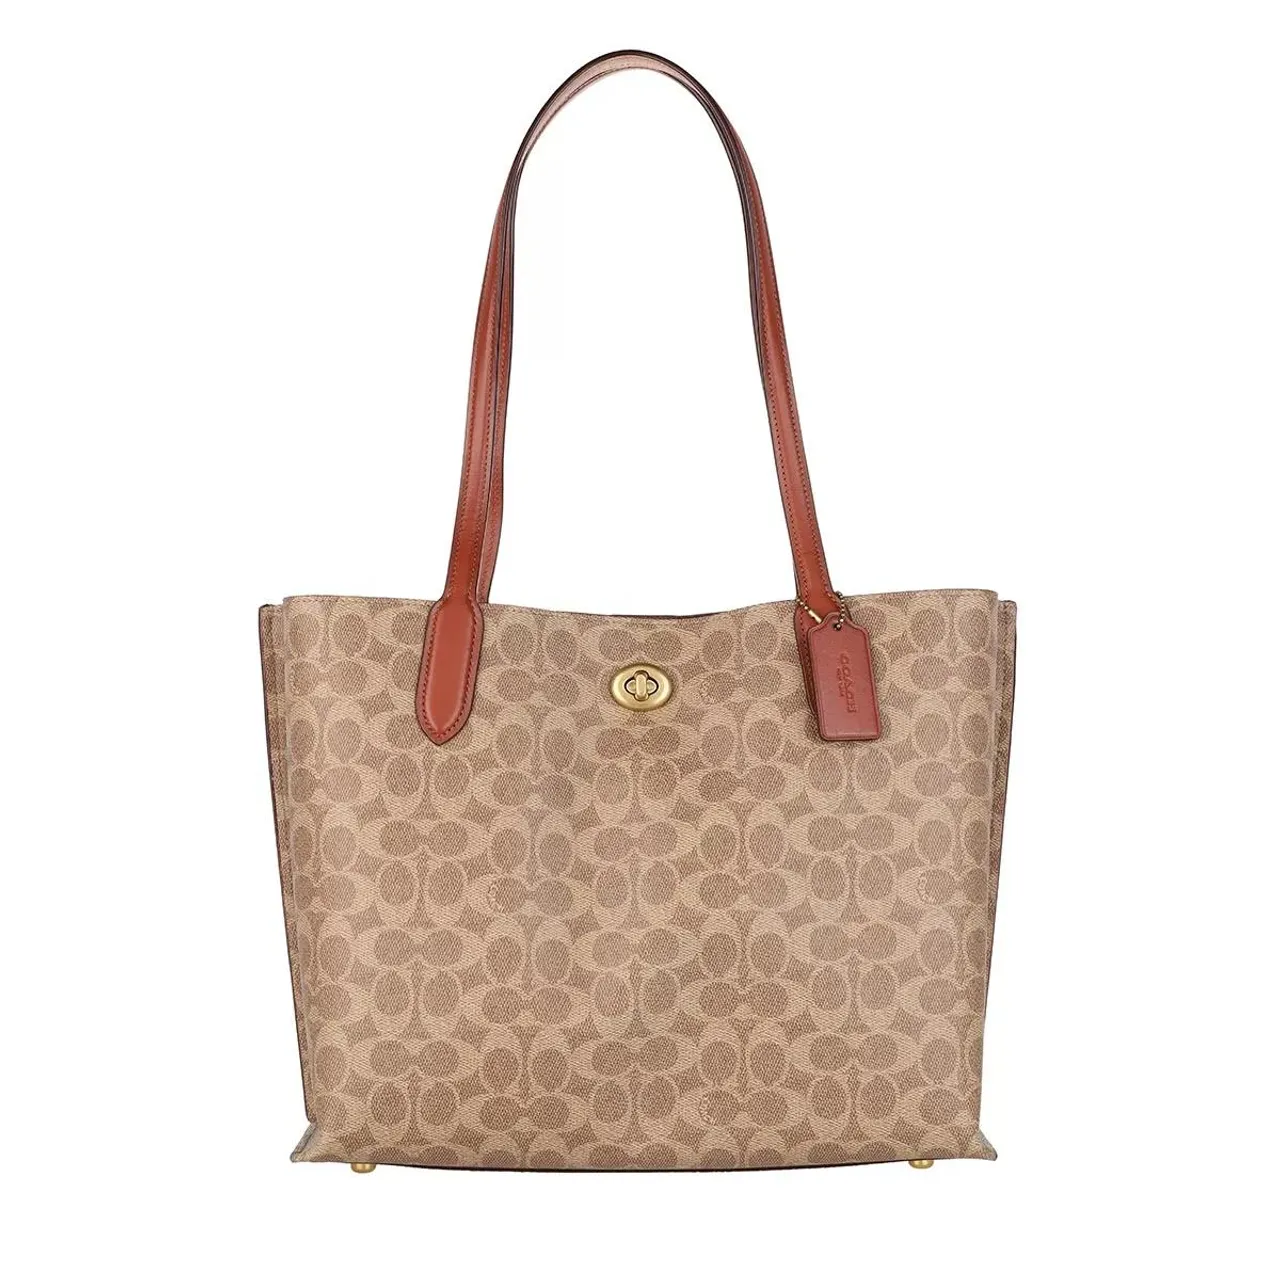 Coach Tote Bags - Coated Canvas Signature Willow Tote - brown - Tote Bags for ladies